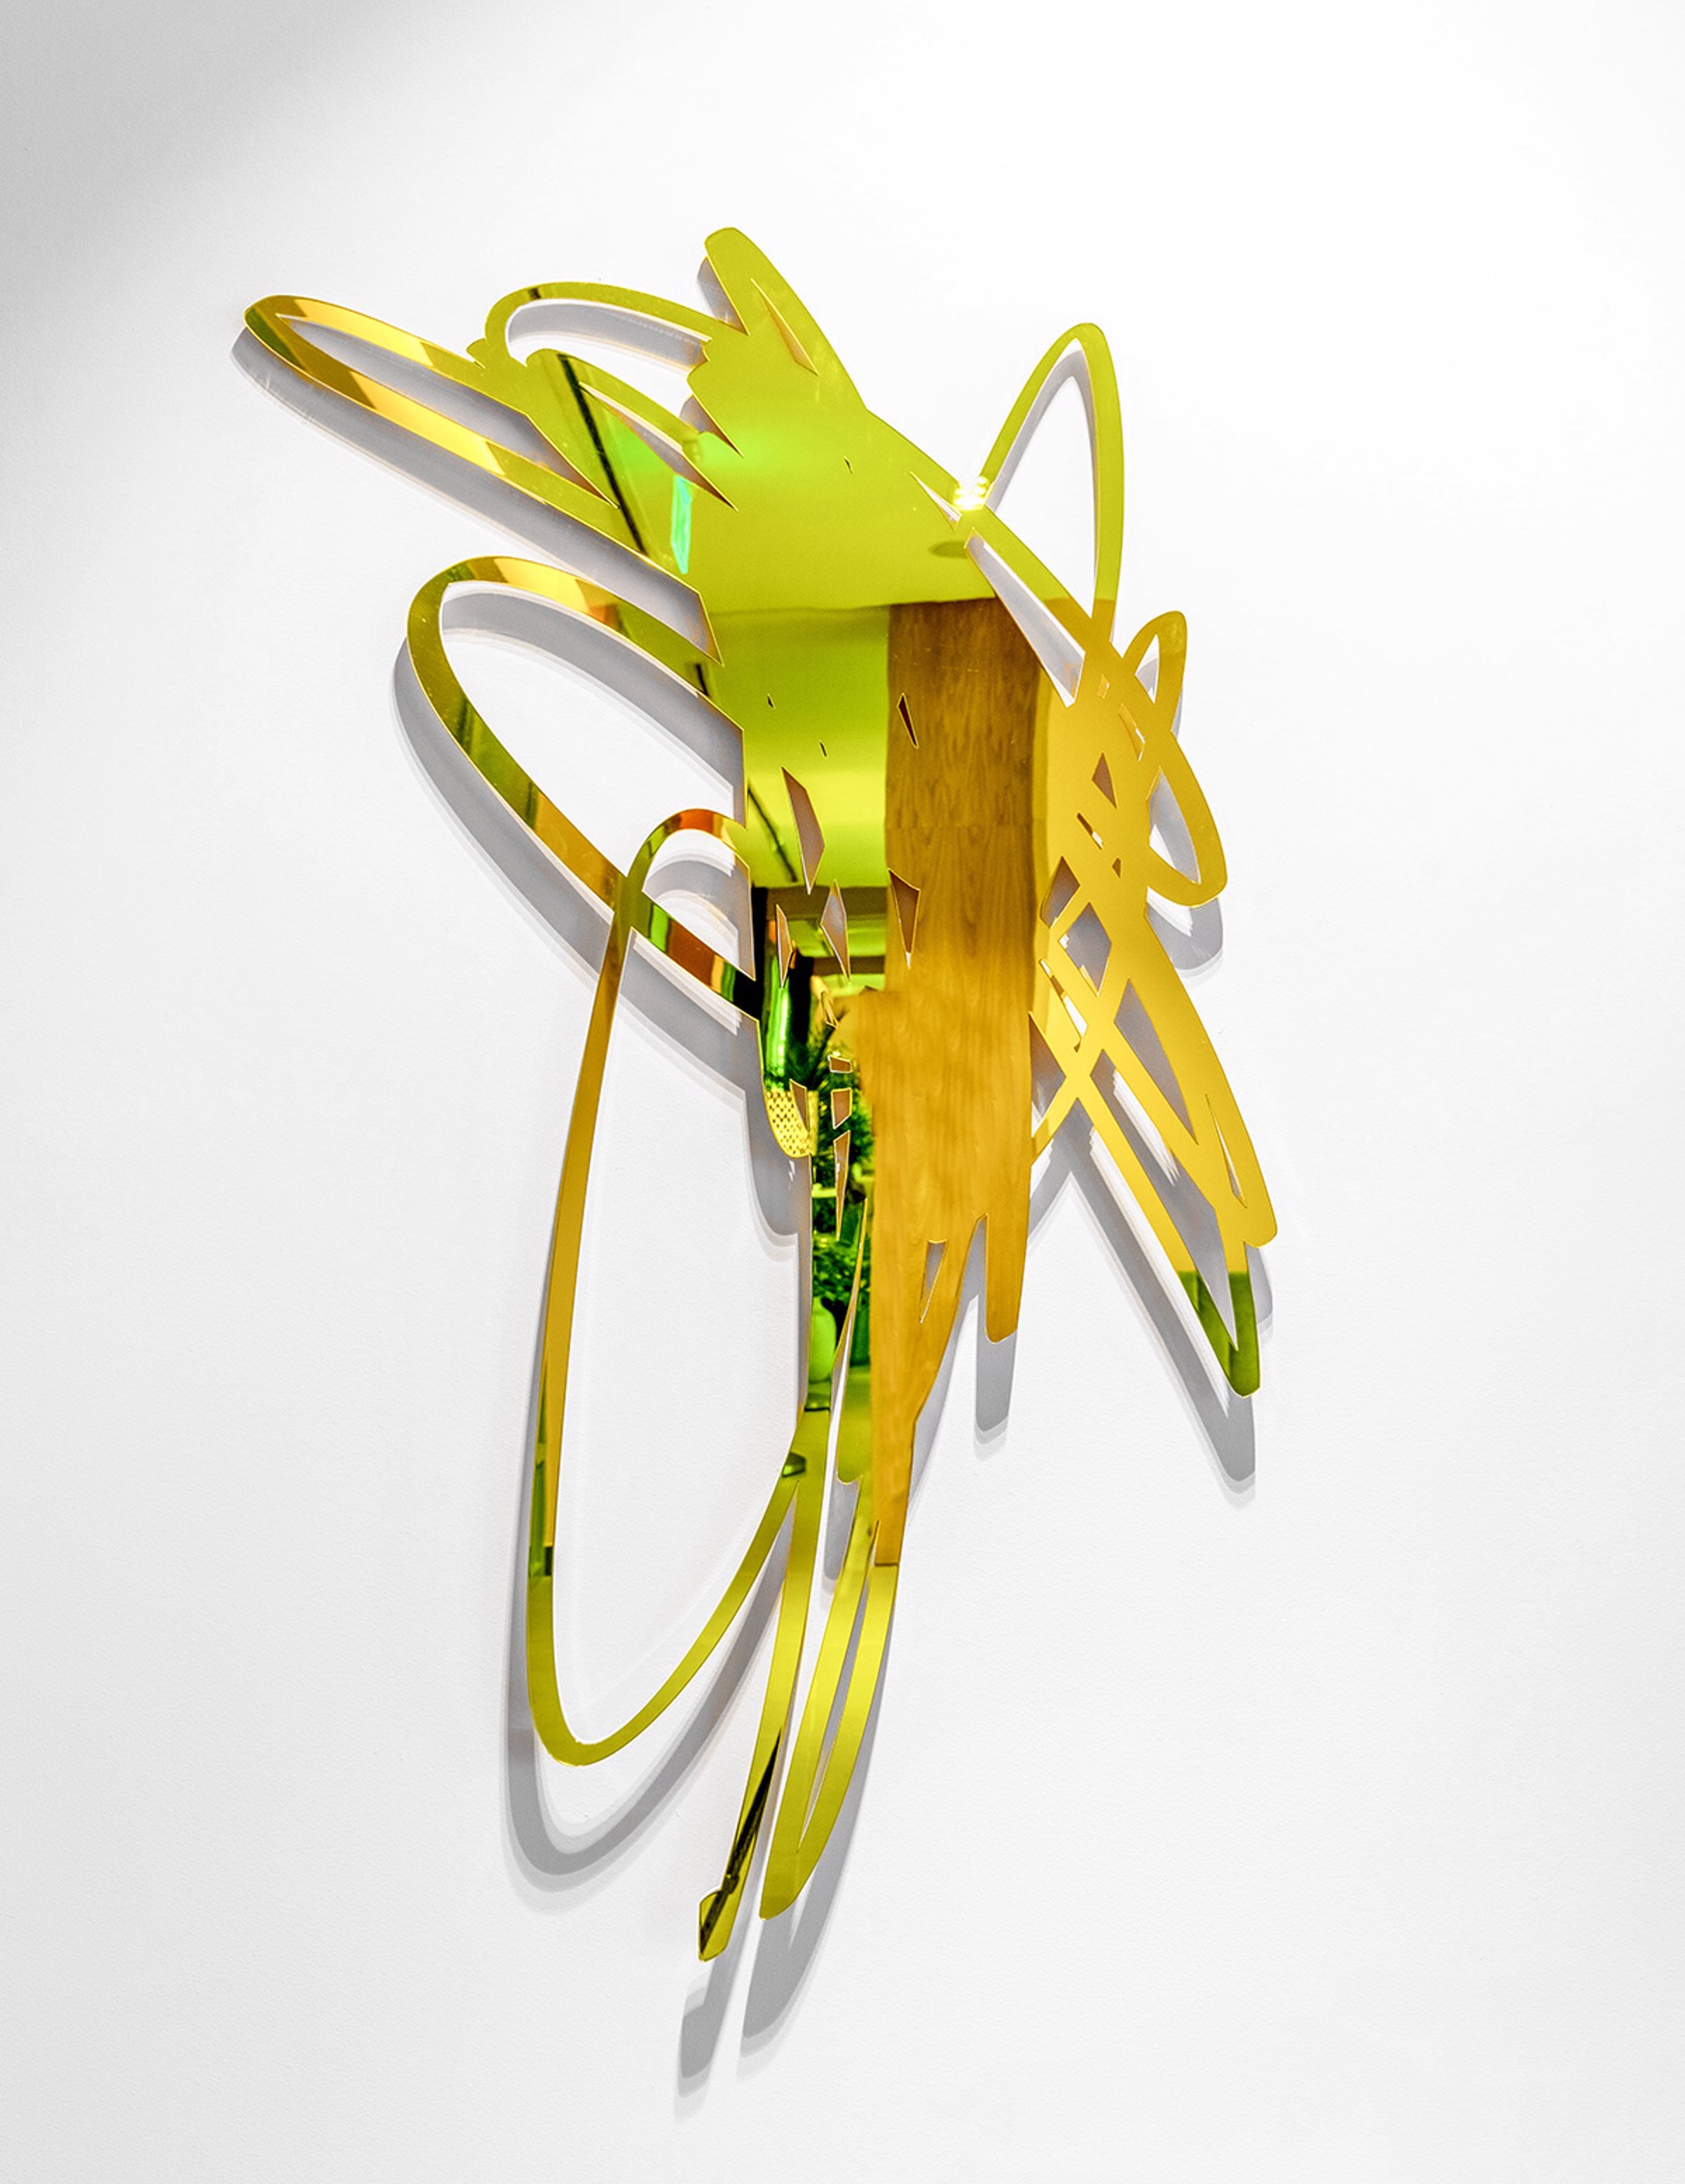 Edge of Chaos, Scribble Wall Sculpture, Yellow, Laser cut mirrored acrylic by Ryan Coleman